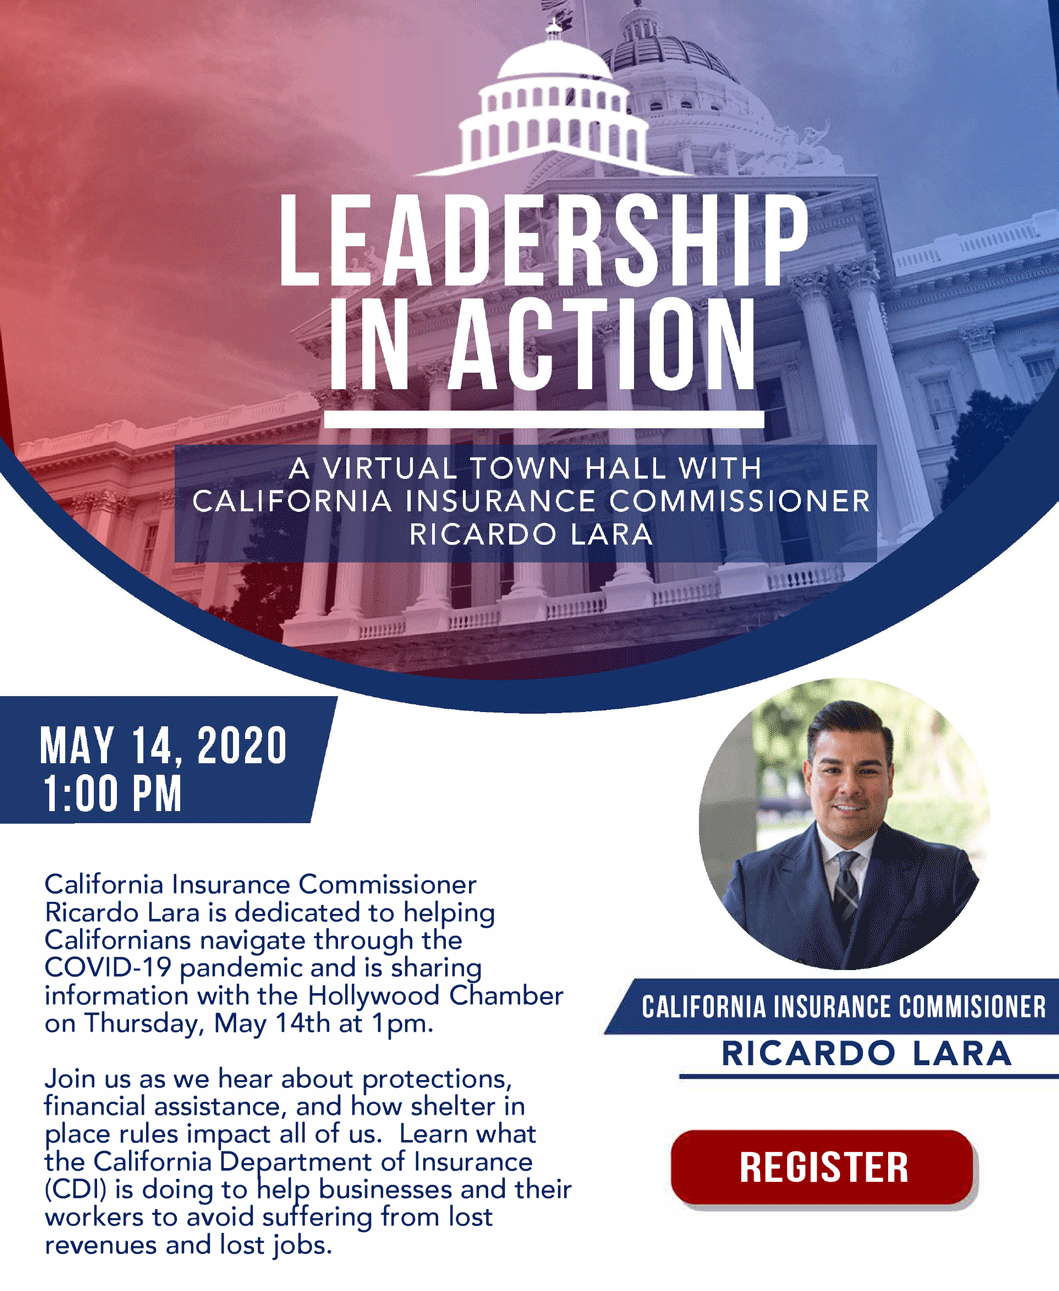 California Insurance Commissioner Ricardo Lara is dedicated to helping Californians navigate through the
COVI D-19 pandemic and is sharing information with the Hollywood Chamber on Thursday, May 14th at 1 pm. 